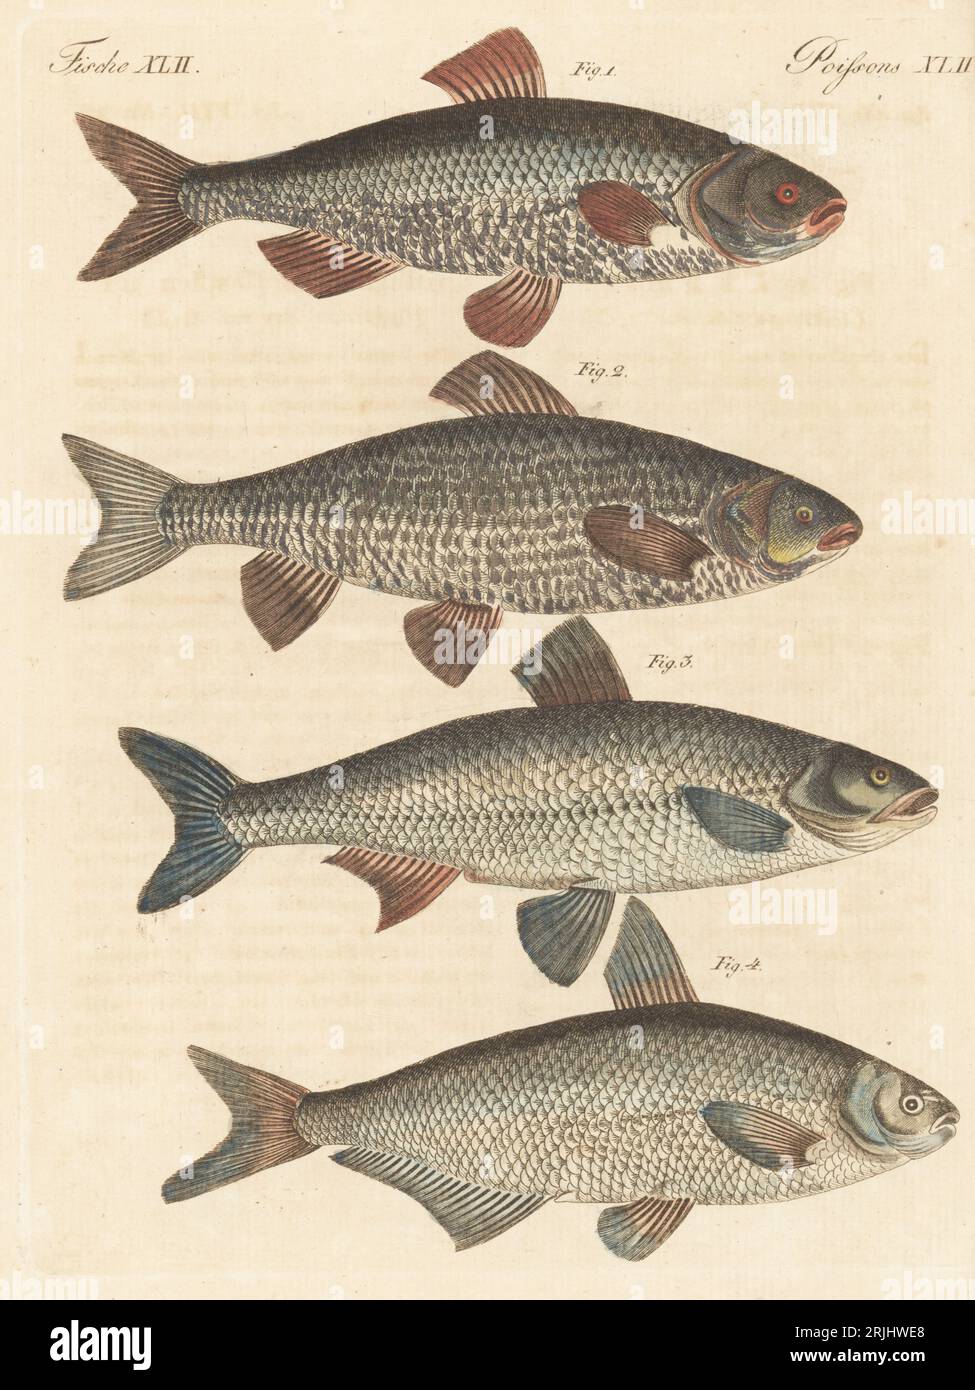 Common roach, Rutilus rutilus 1, ide or orfe, Leuciscus idus 2, asp, Leuciscus aspius 3, and zope or blue bream, Ballerus ballerus 4. German fresh-water fish. Handcoloured copperplate engraving from Carl Bertuch's Bilderbuch fur Kinder (Picture Book for Children), Weimar, 1813. A 12-volume encyclopedia for children illustrated with almost 1,200 engraved plates on natural history, science, costume, mythology, etc., published from 1790-1830. Stock Photo